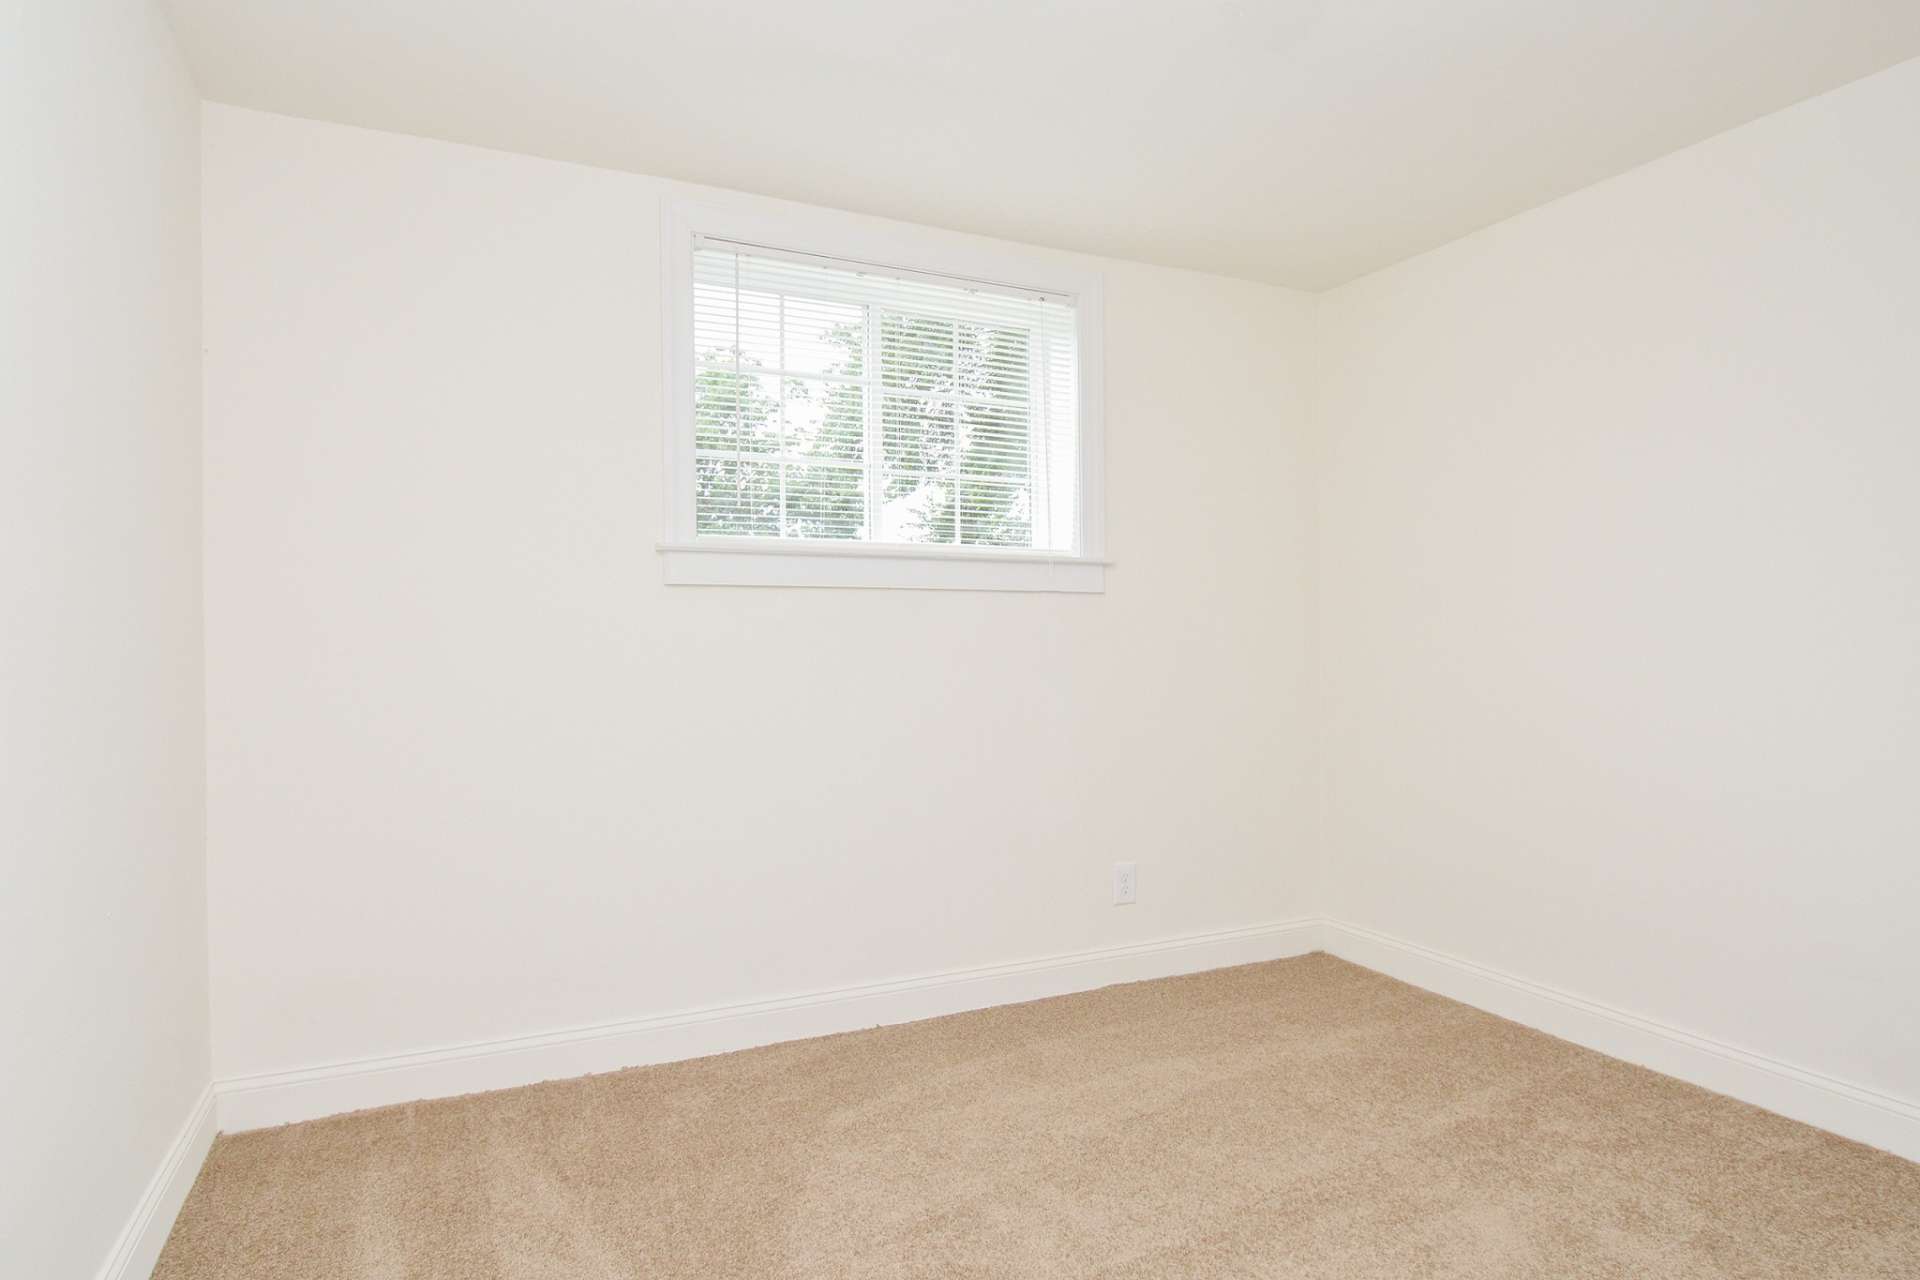 Carpeted bedroom with a window at Greenville on 141.